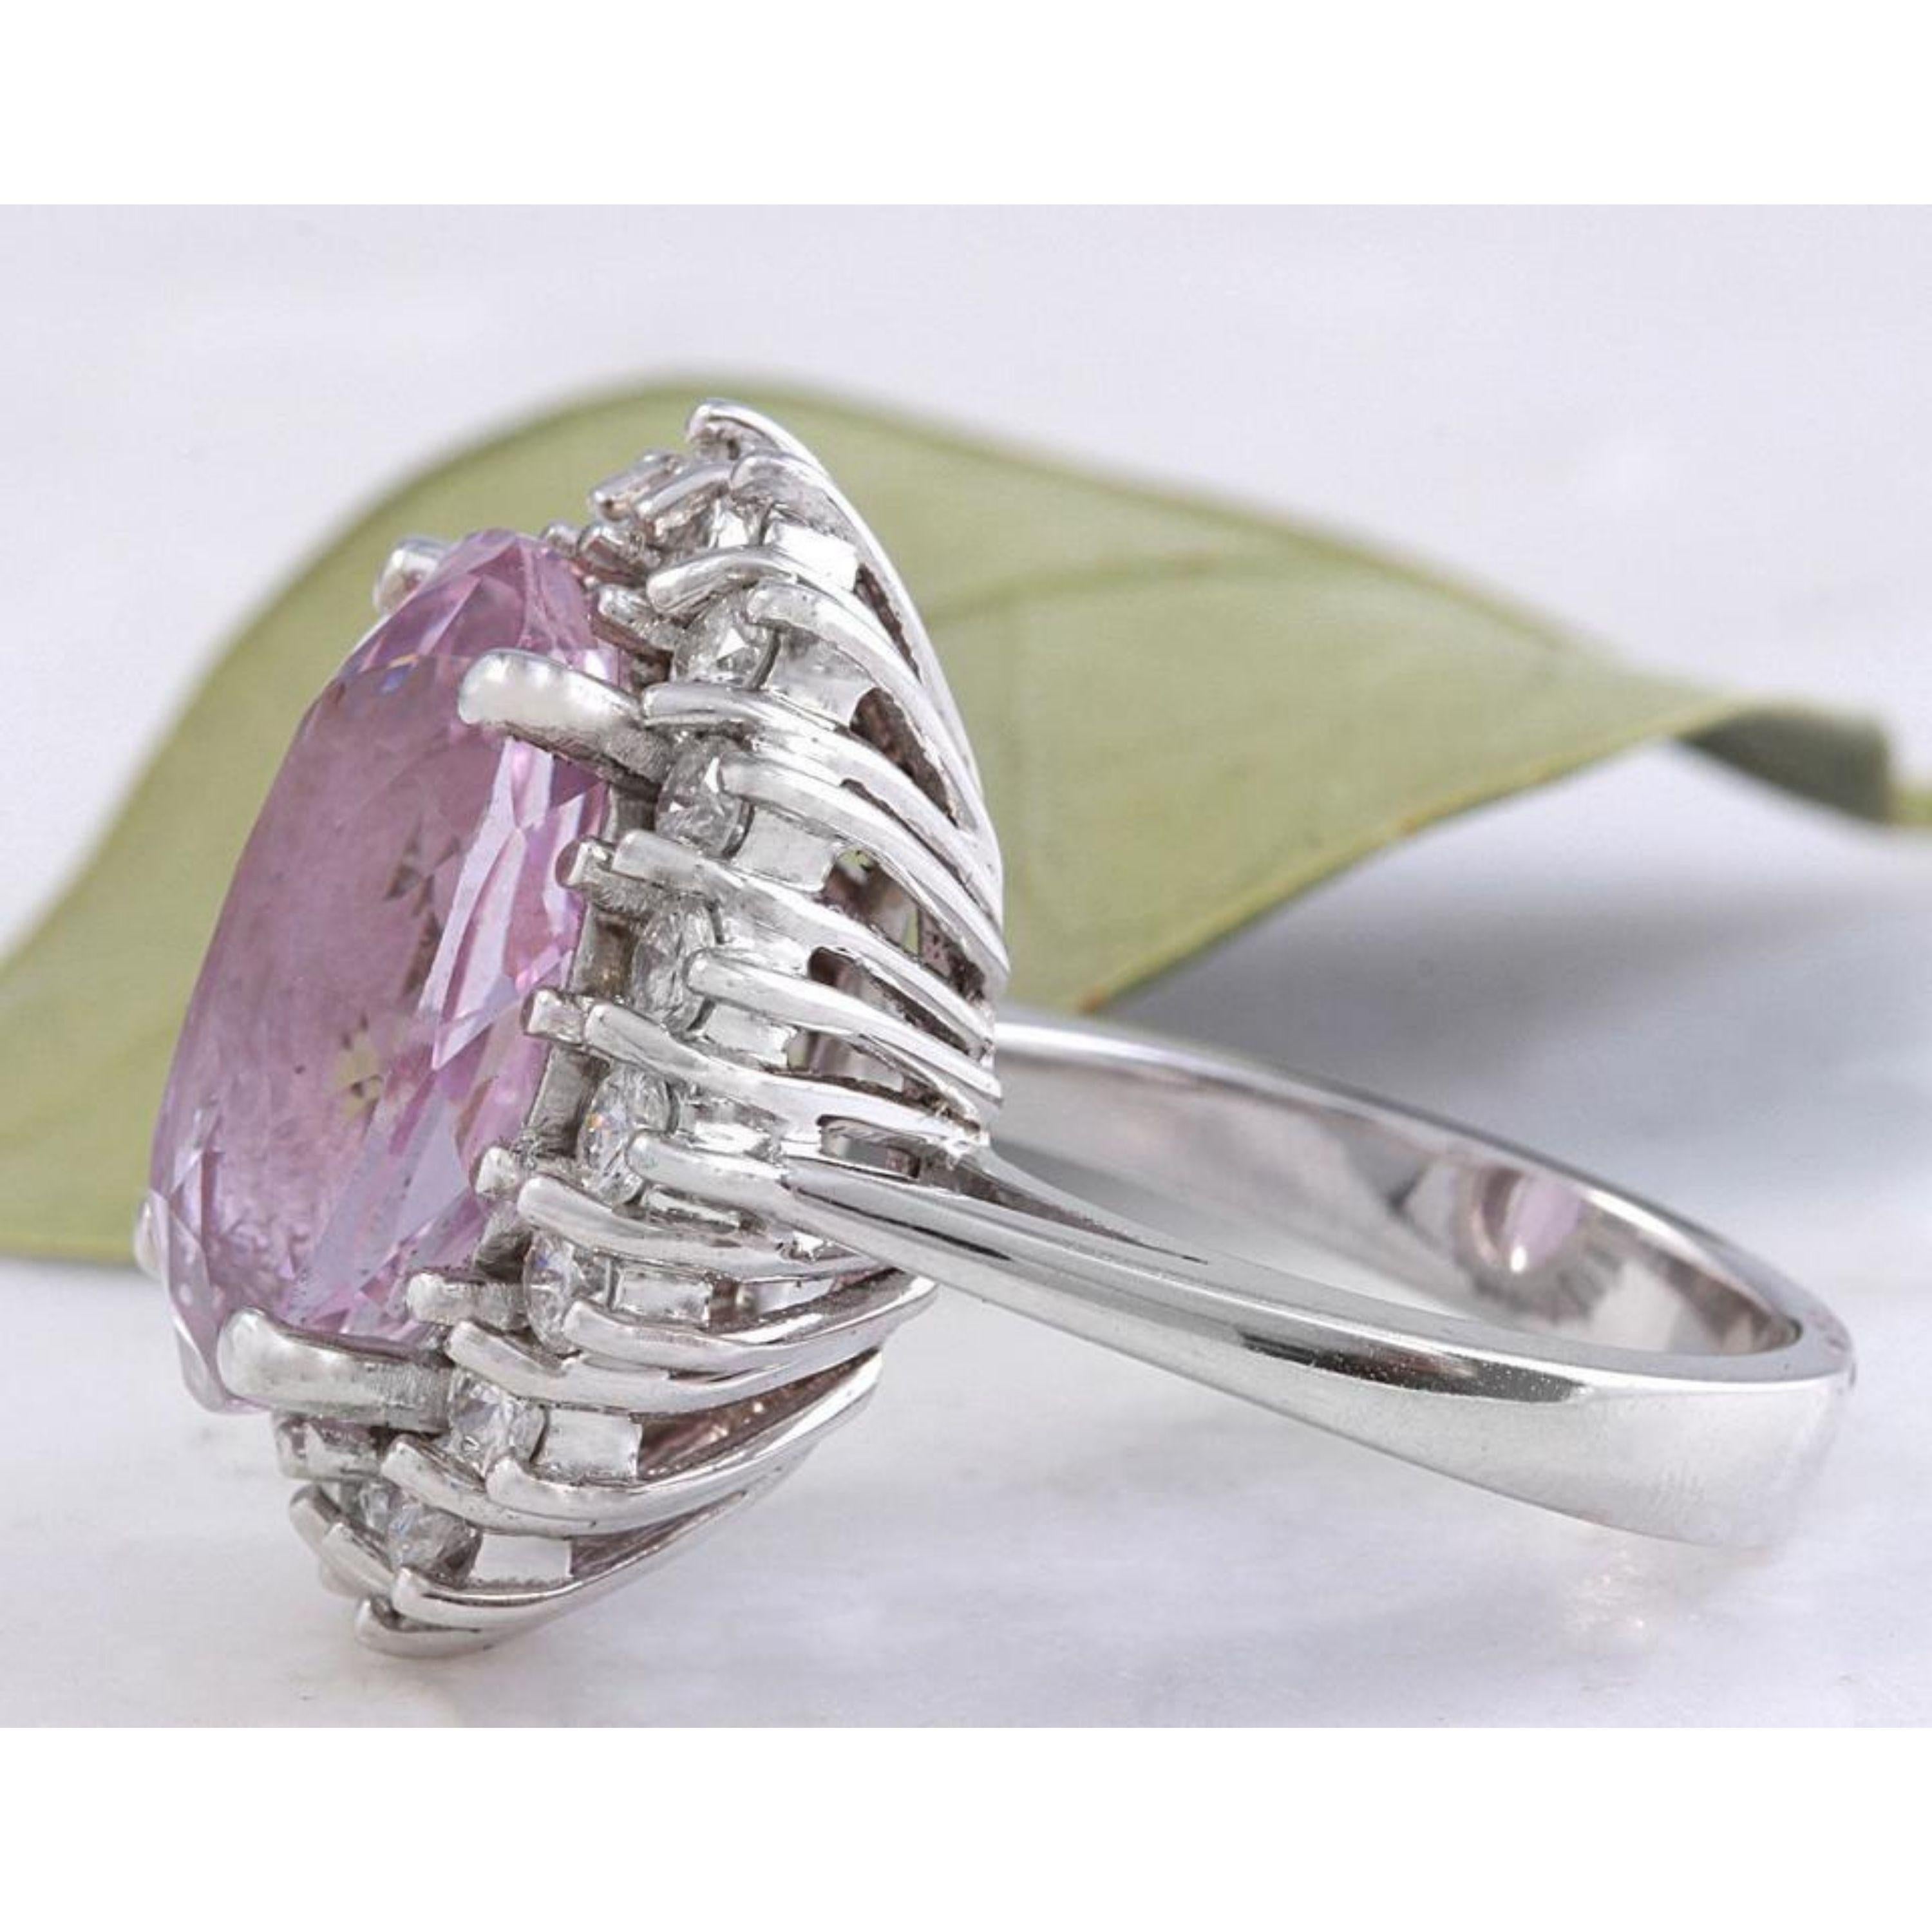 Mixed Cut 12.02 Carat Exquisite Natural Pink Kunzite and Diamond 14K Solid White Gold Ring For Sale